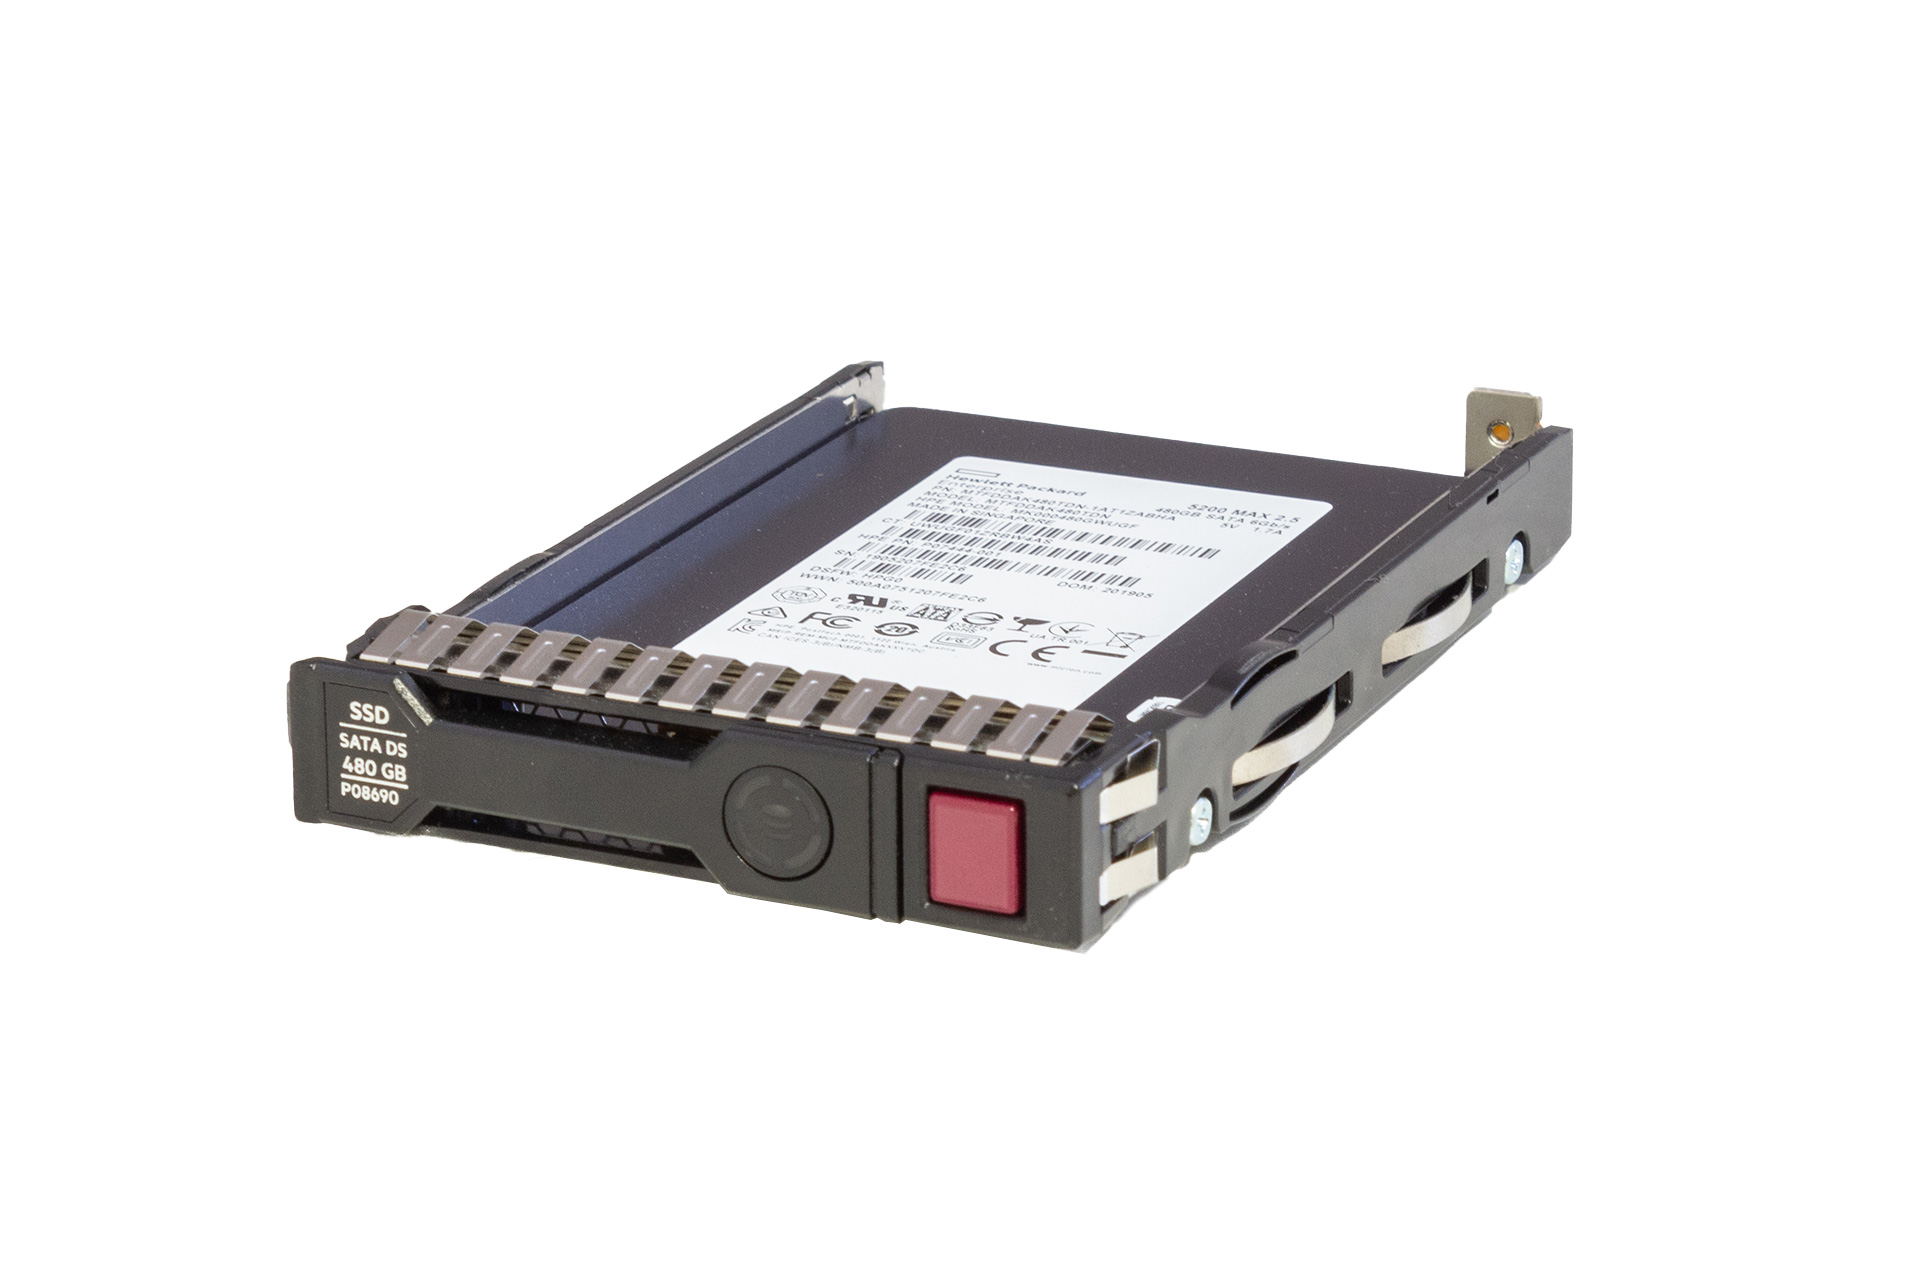 HPE SSD 480GB 6G SATA SSD 2.5“ SFF Mixed Used Solid State Drive für Gen8-Gen10 Server